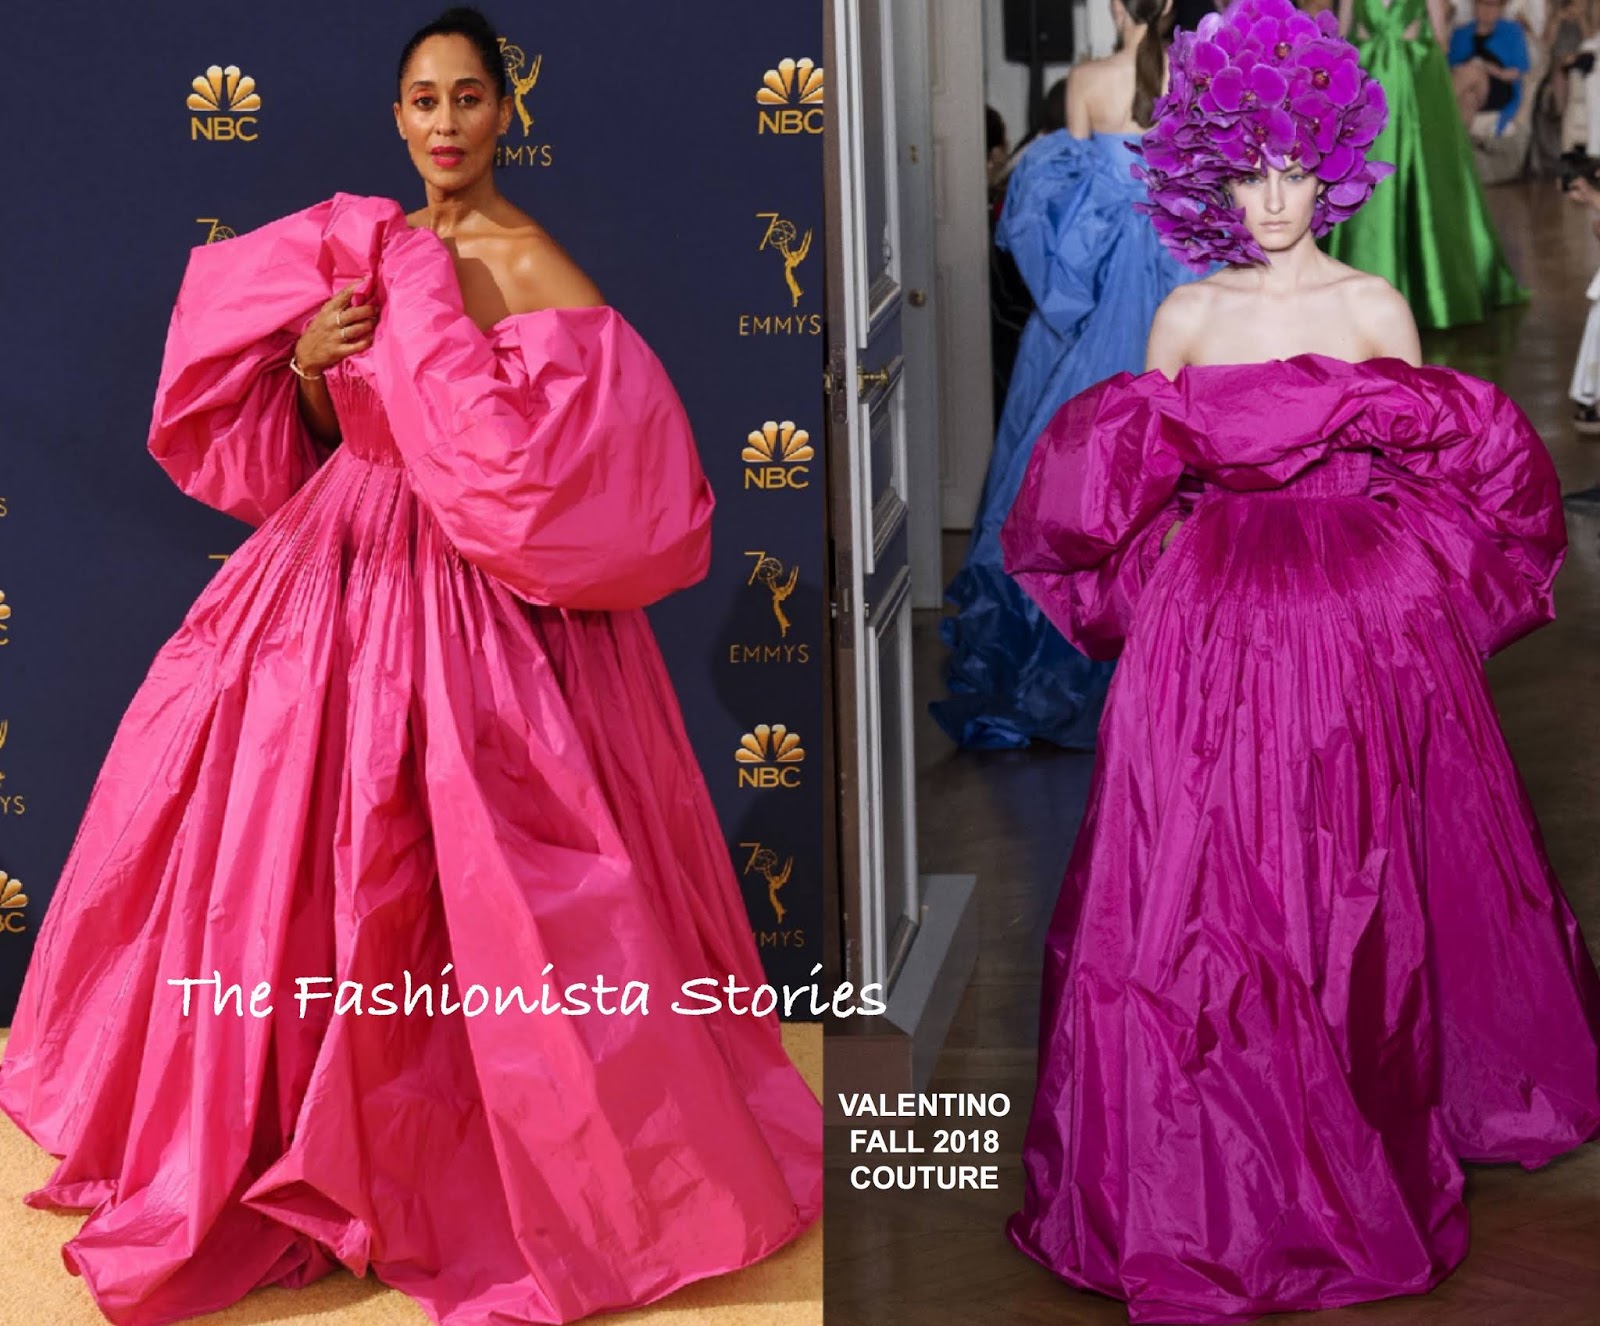 Tracee Ross in Couture at the Primetime Emmy Awards